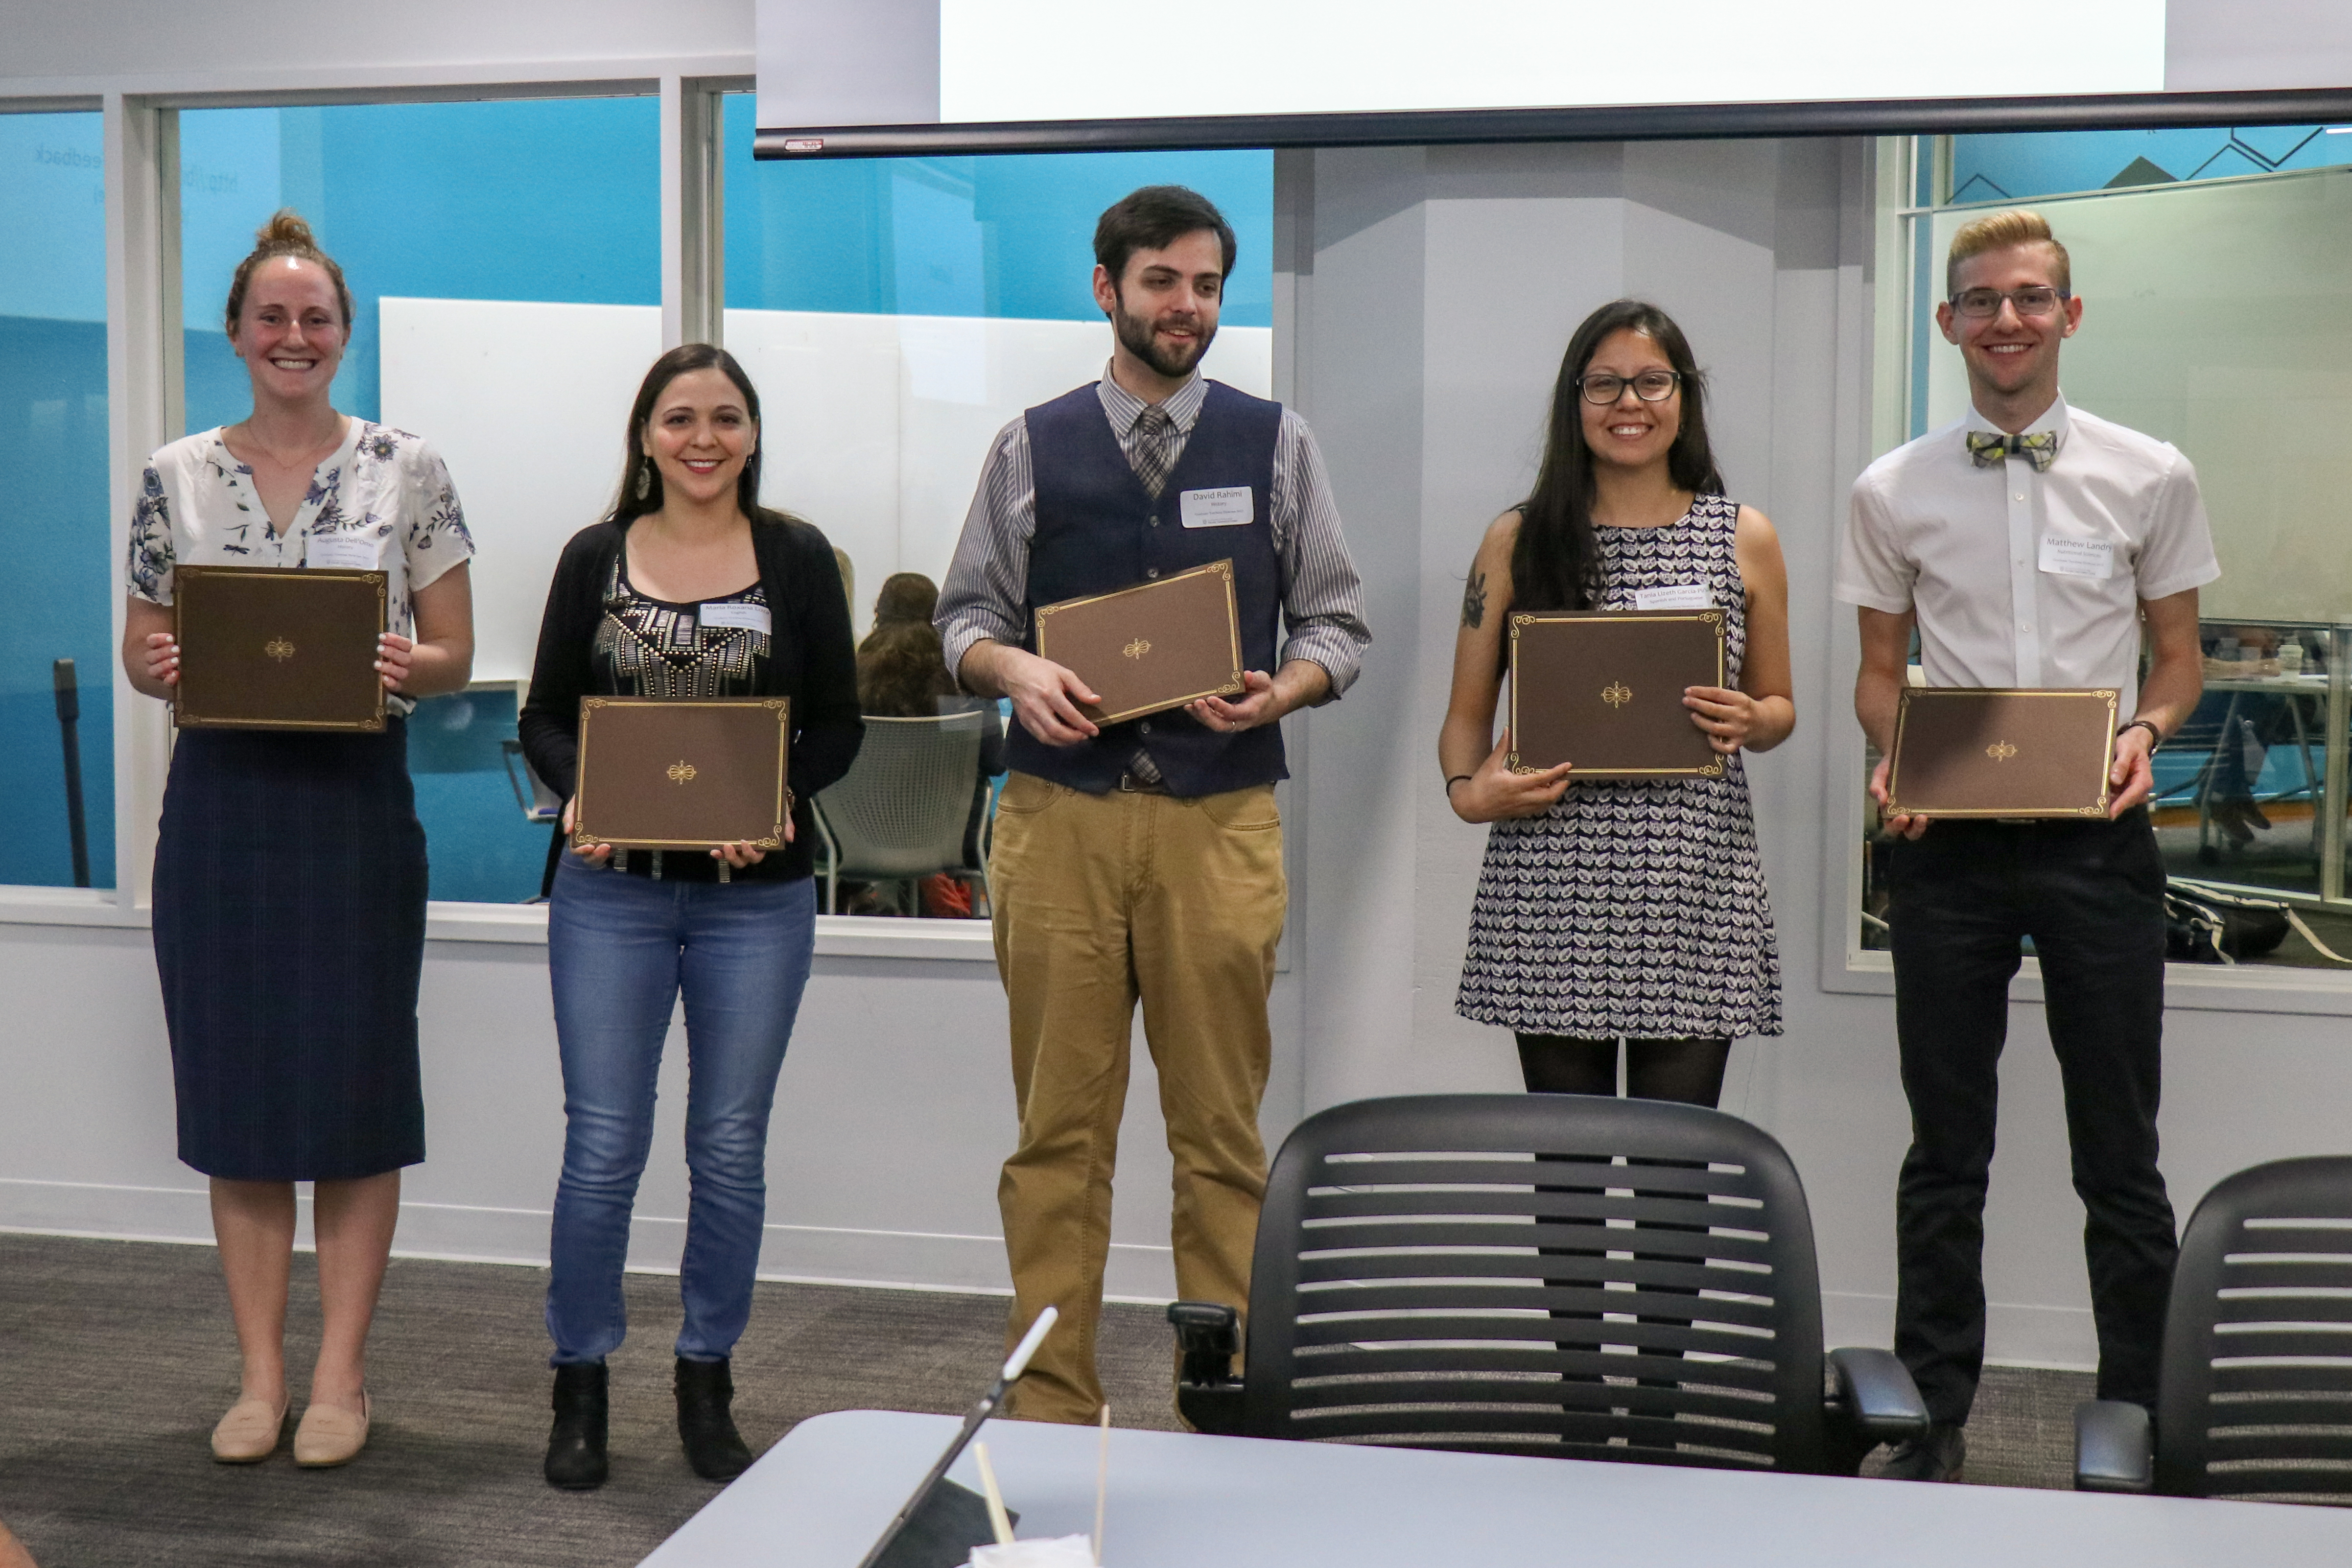 people holding certificates in a row